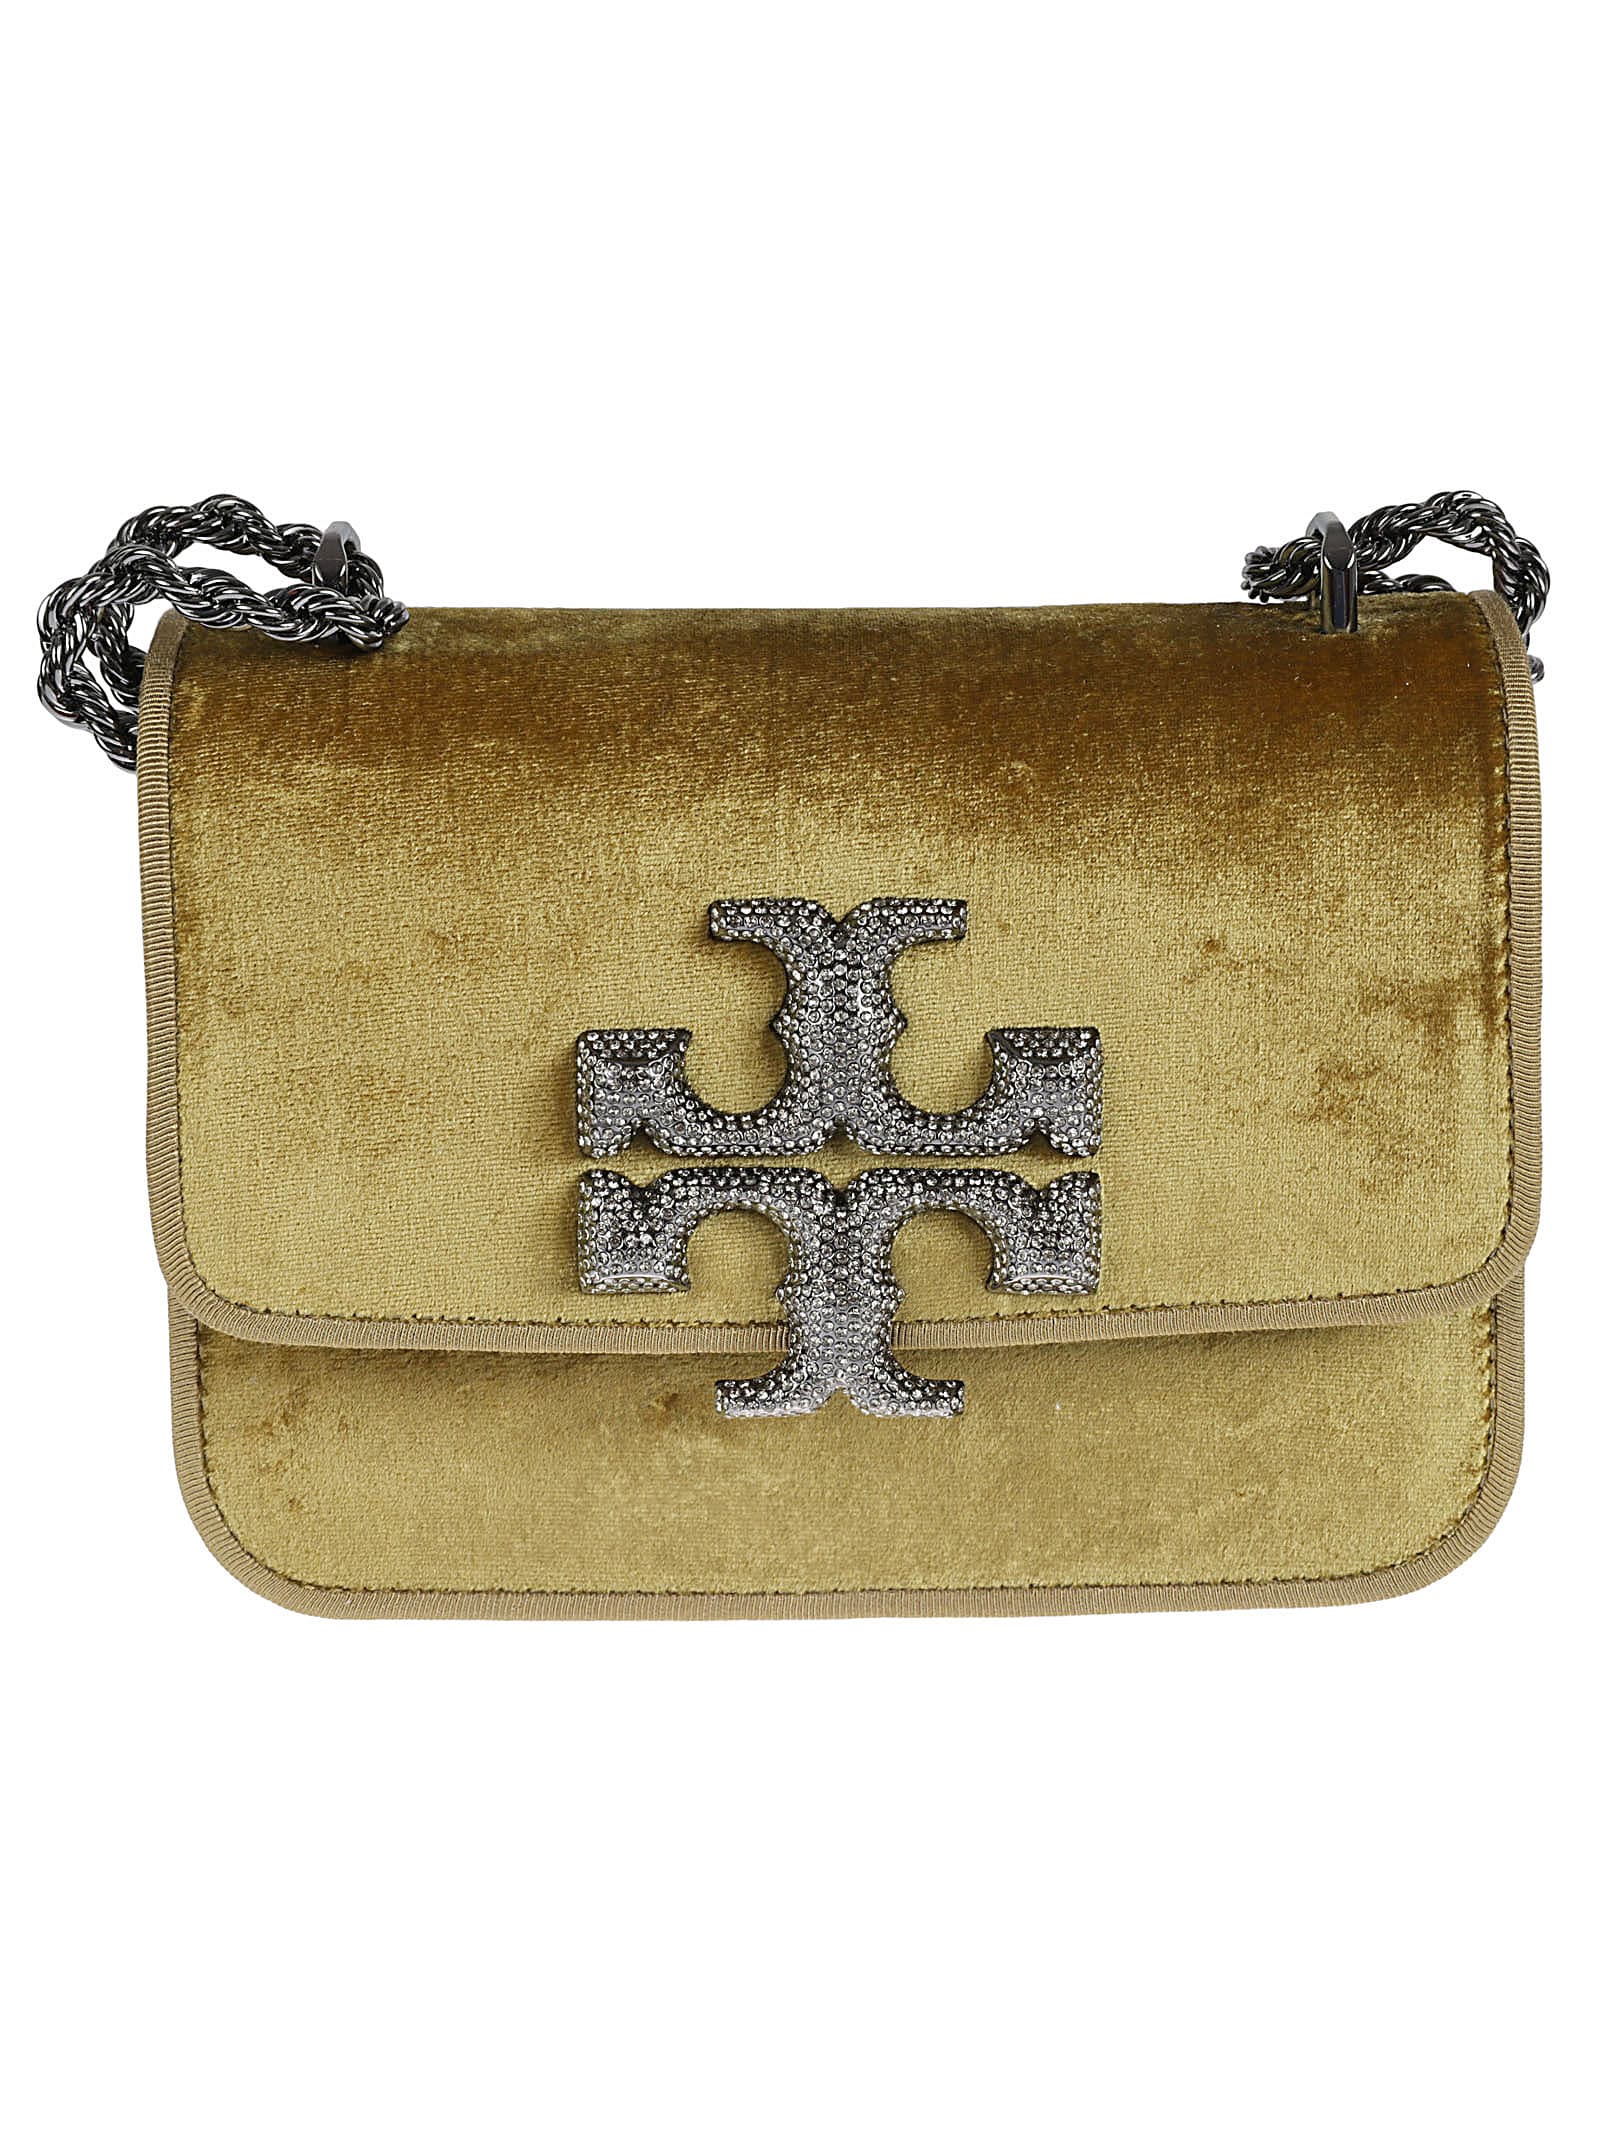 Tory Burch Eleanor Embossed Small Convertible Velvet Pave Shoulder Bag |  italist, ALWAYS LIKE A SALE